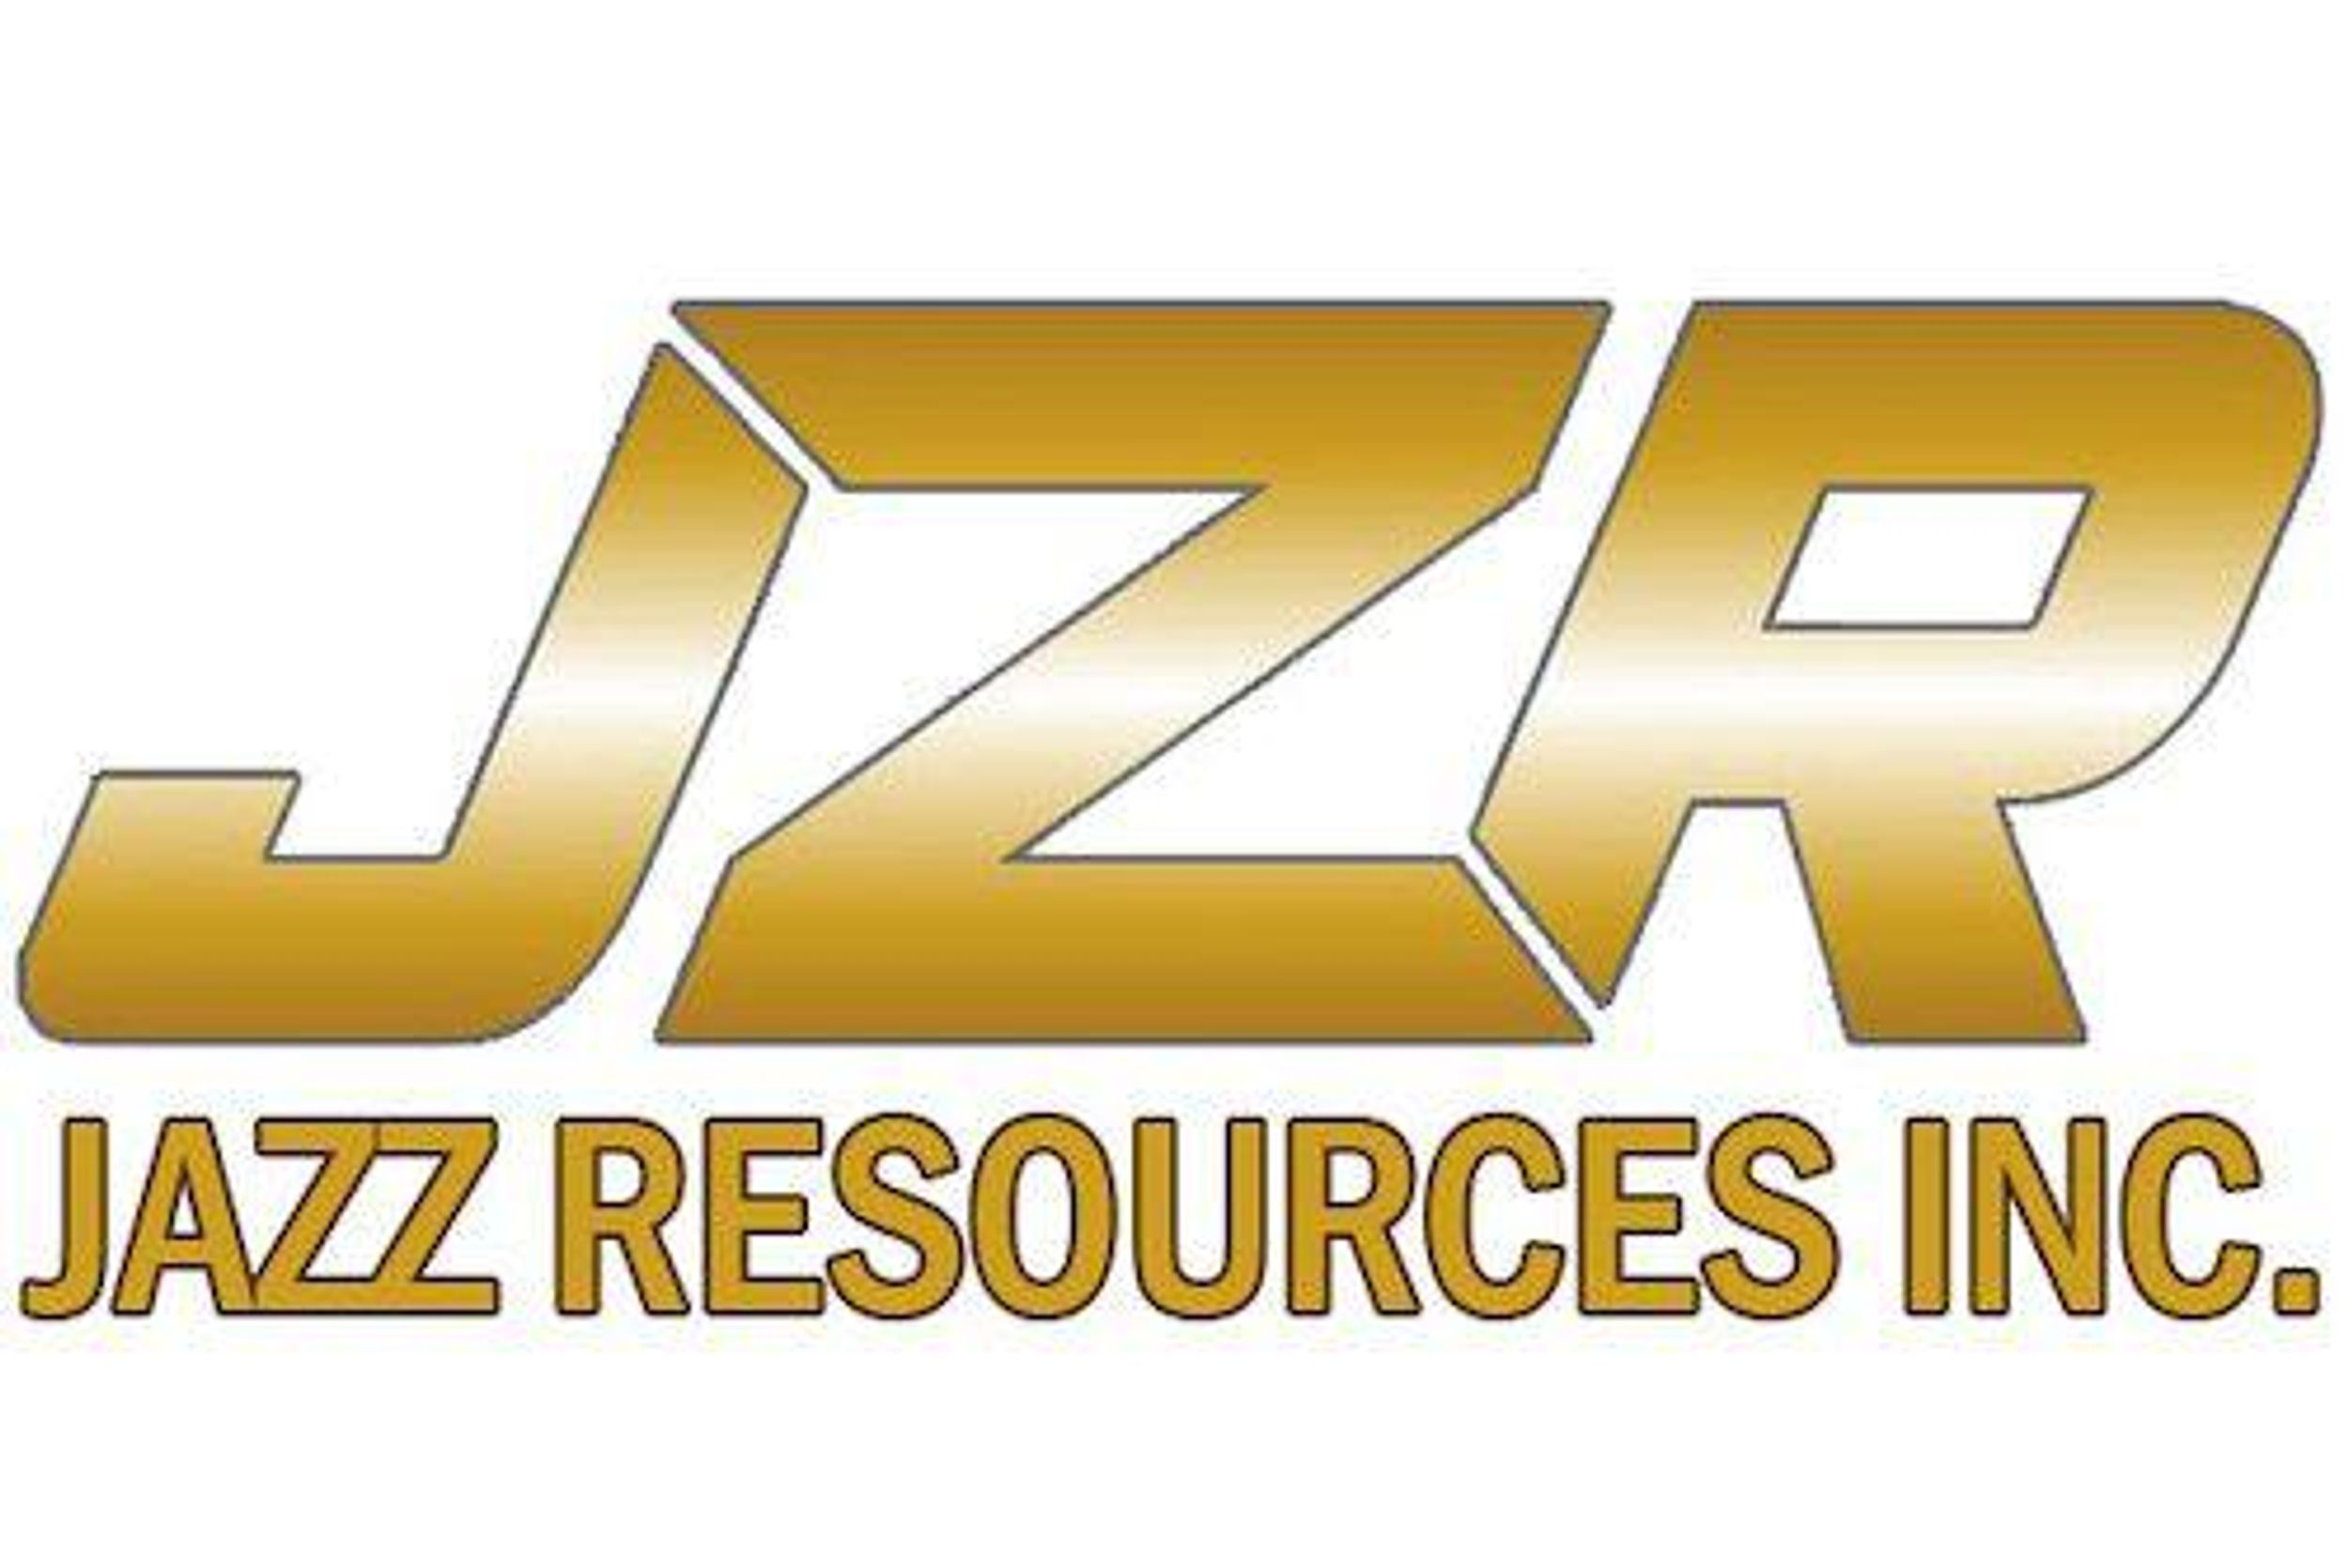 Jazz Resources Increases Size of Non-Brokered Offering